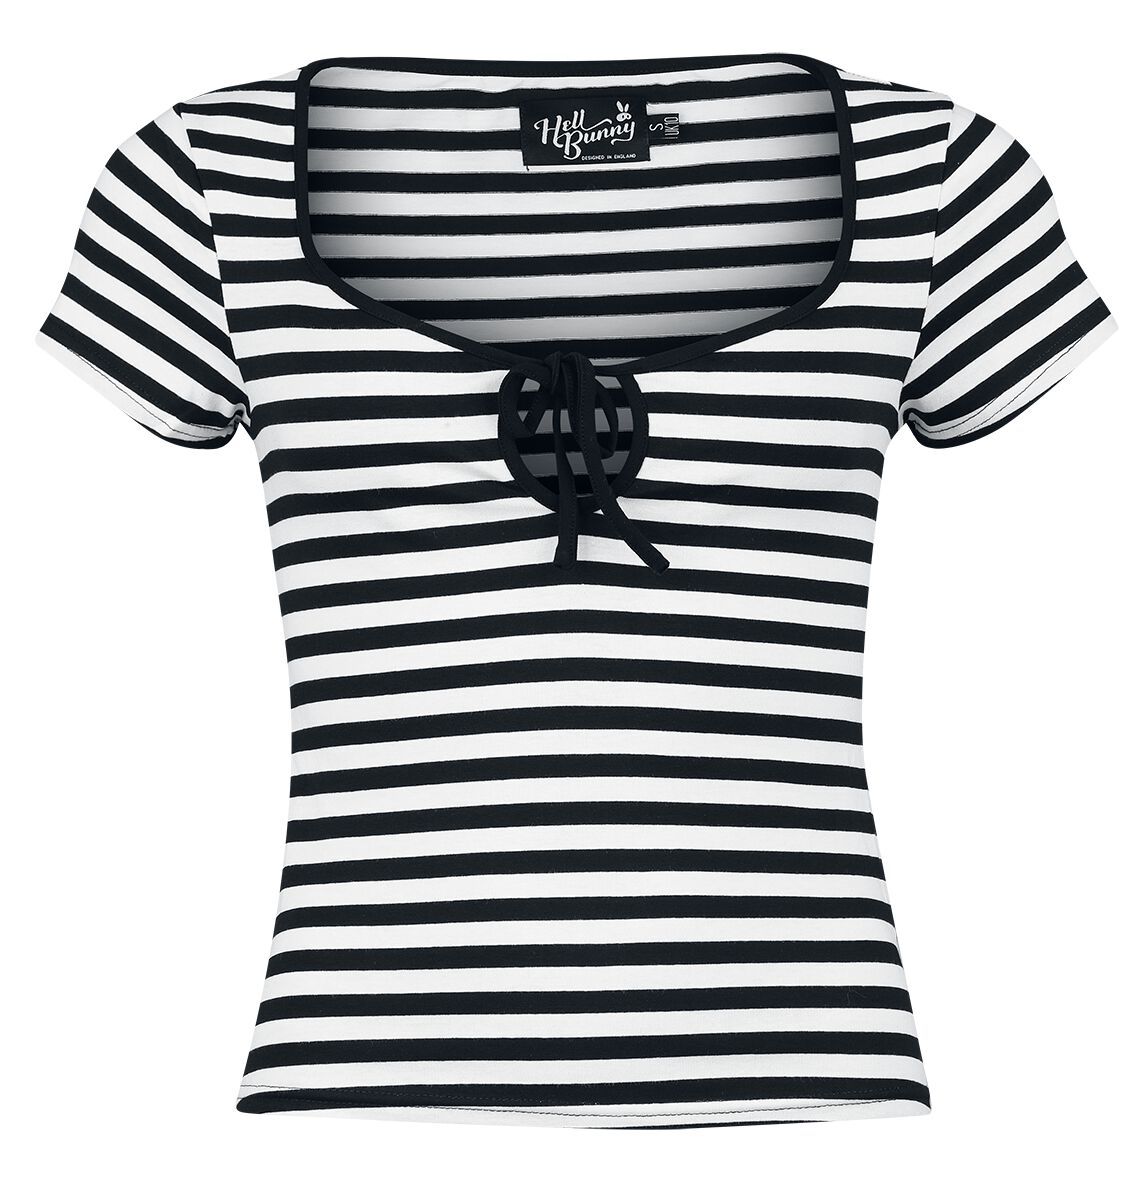 Image of T-Shirt Rockabilly di Hell Bunny - Kit Top - XS a XL - Donna - nero/bianco